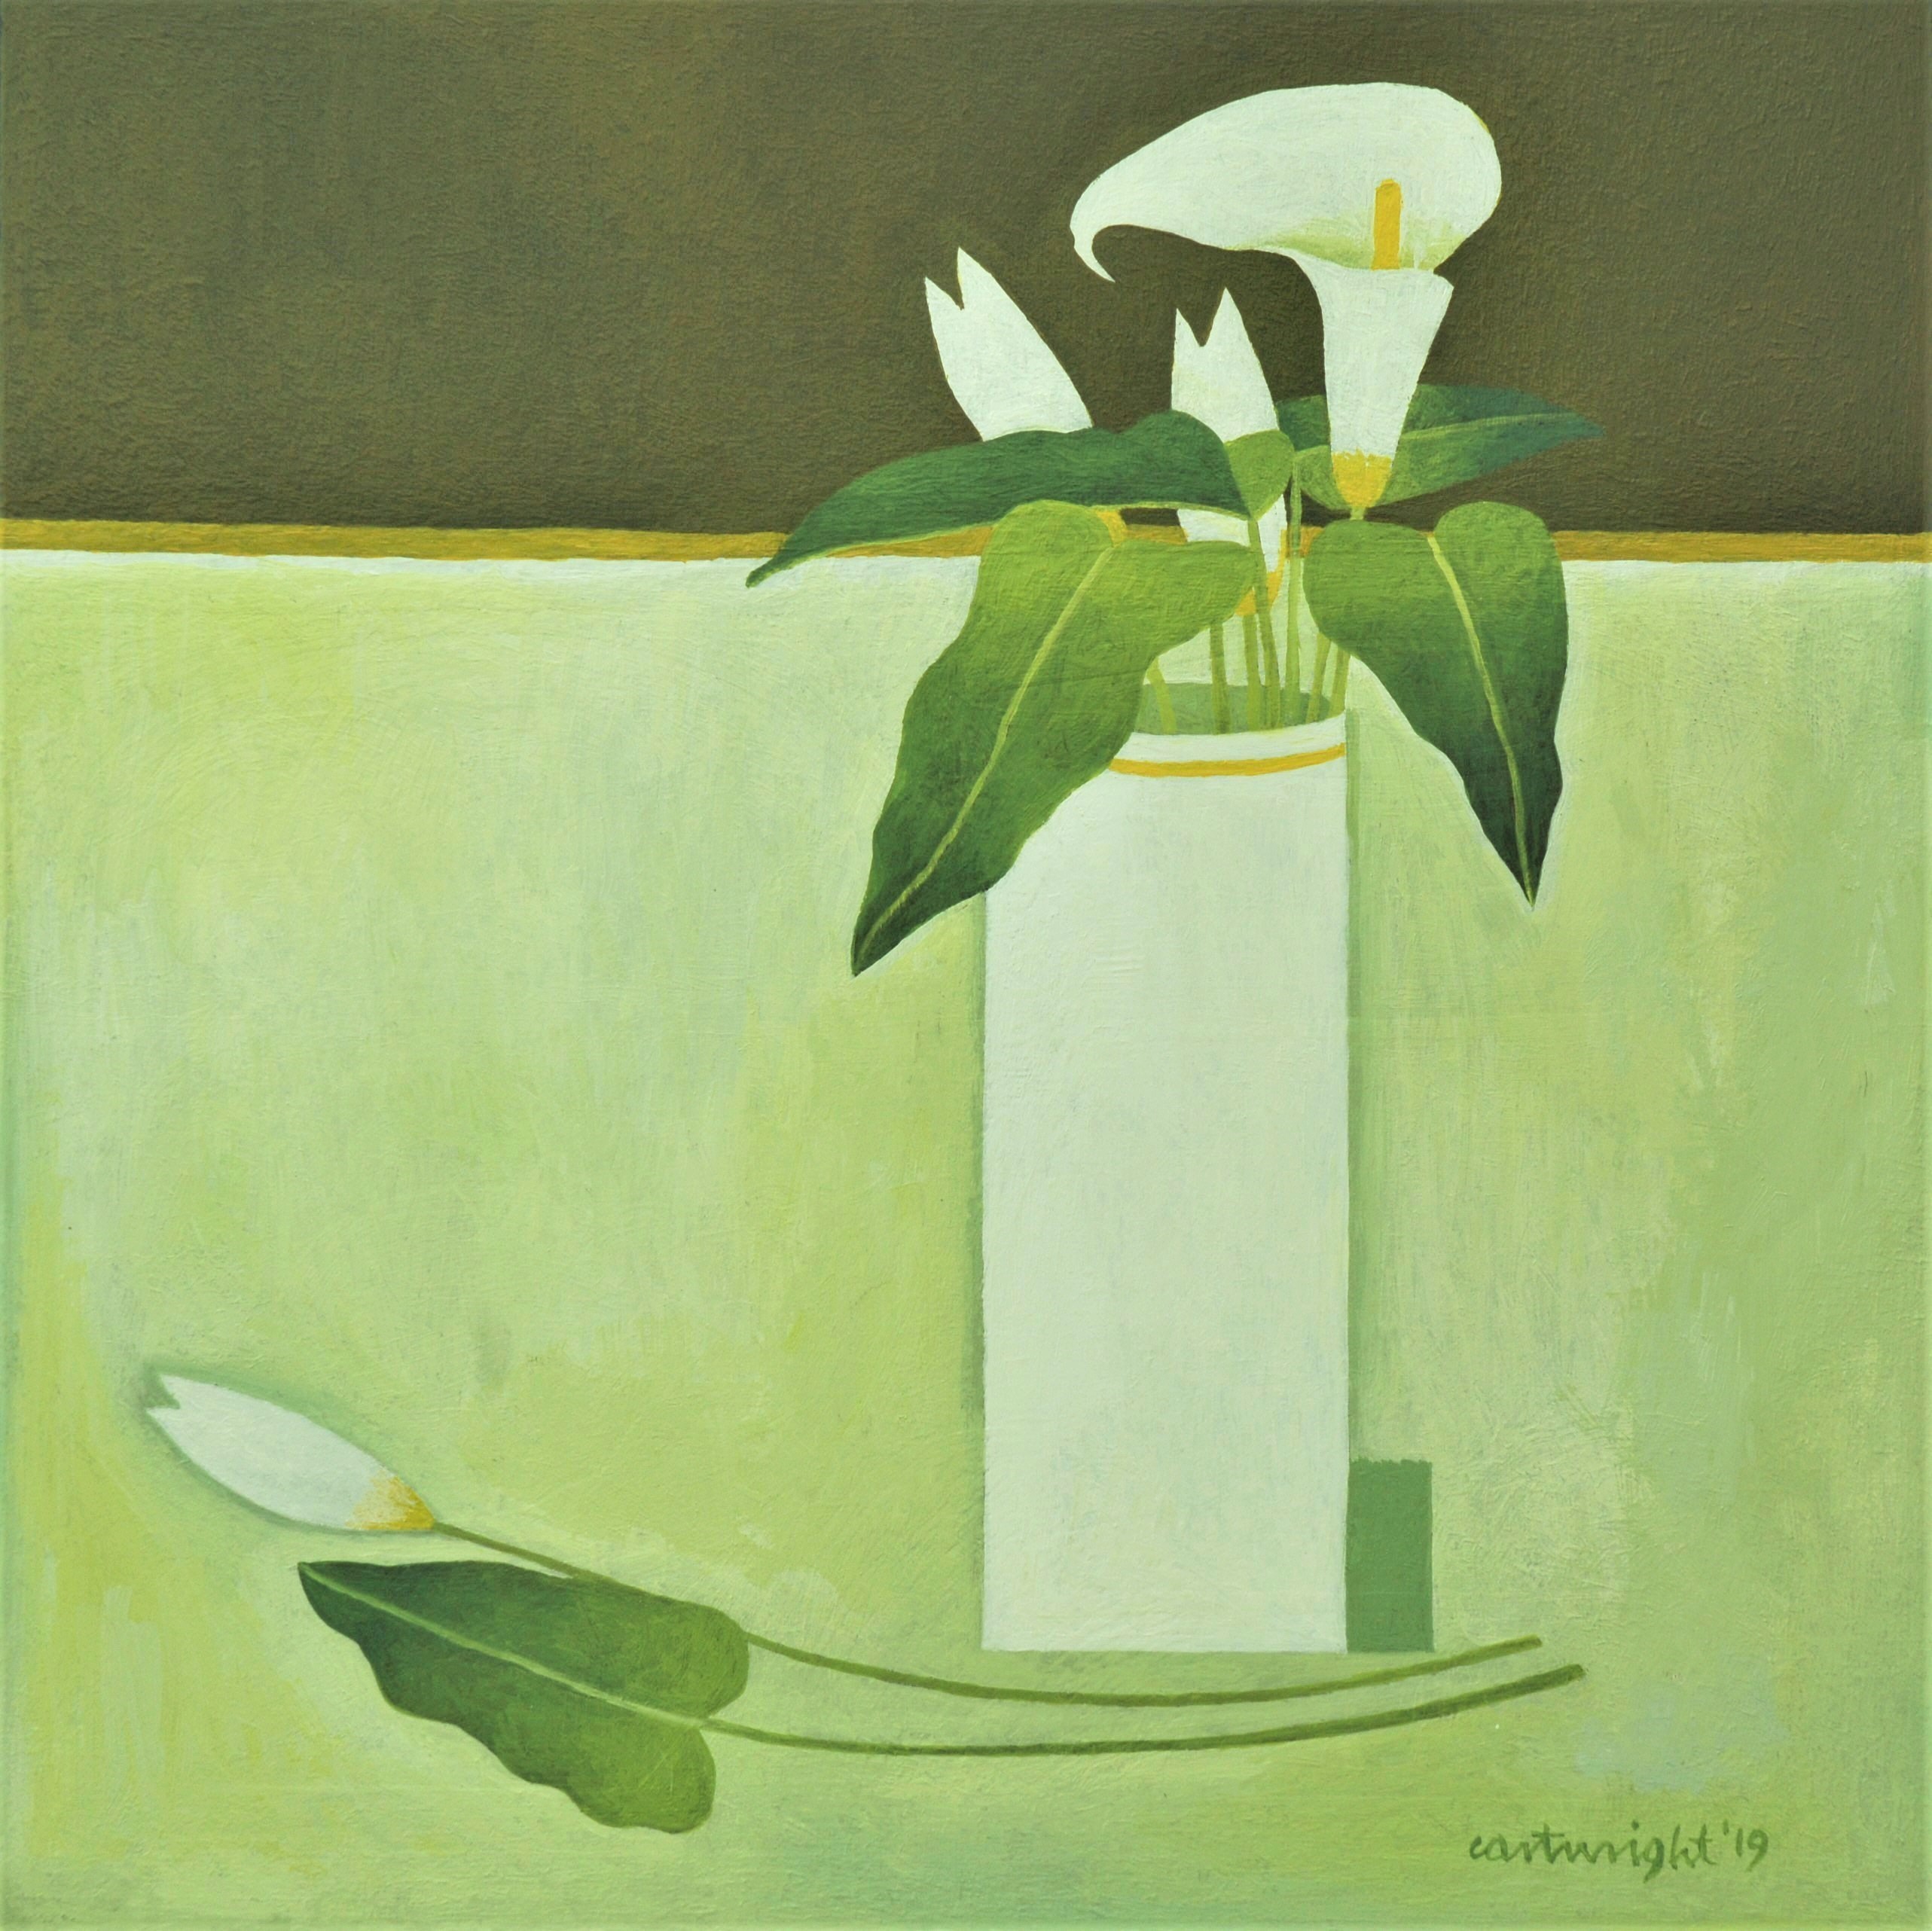 lilies in a vase painting by reg cartwright 2019